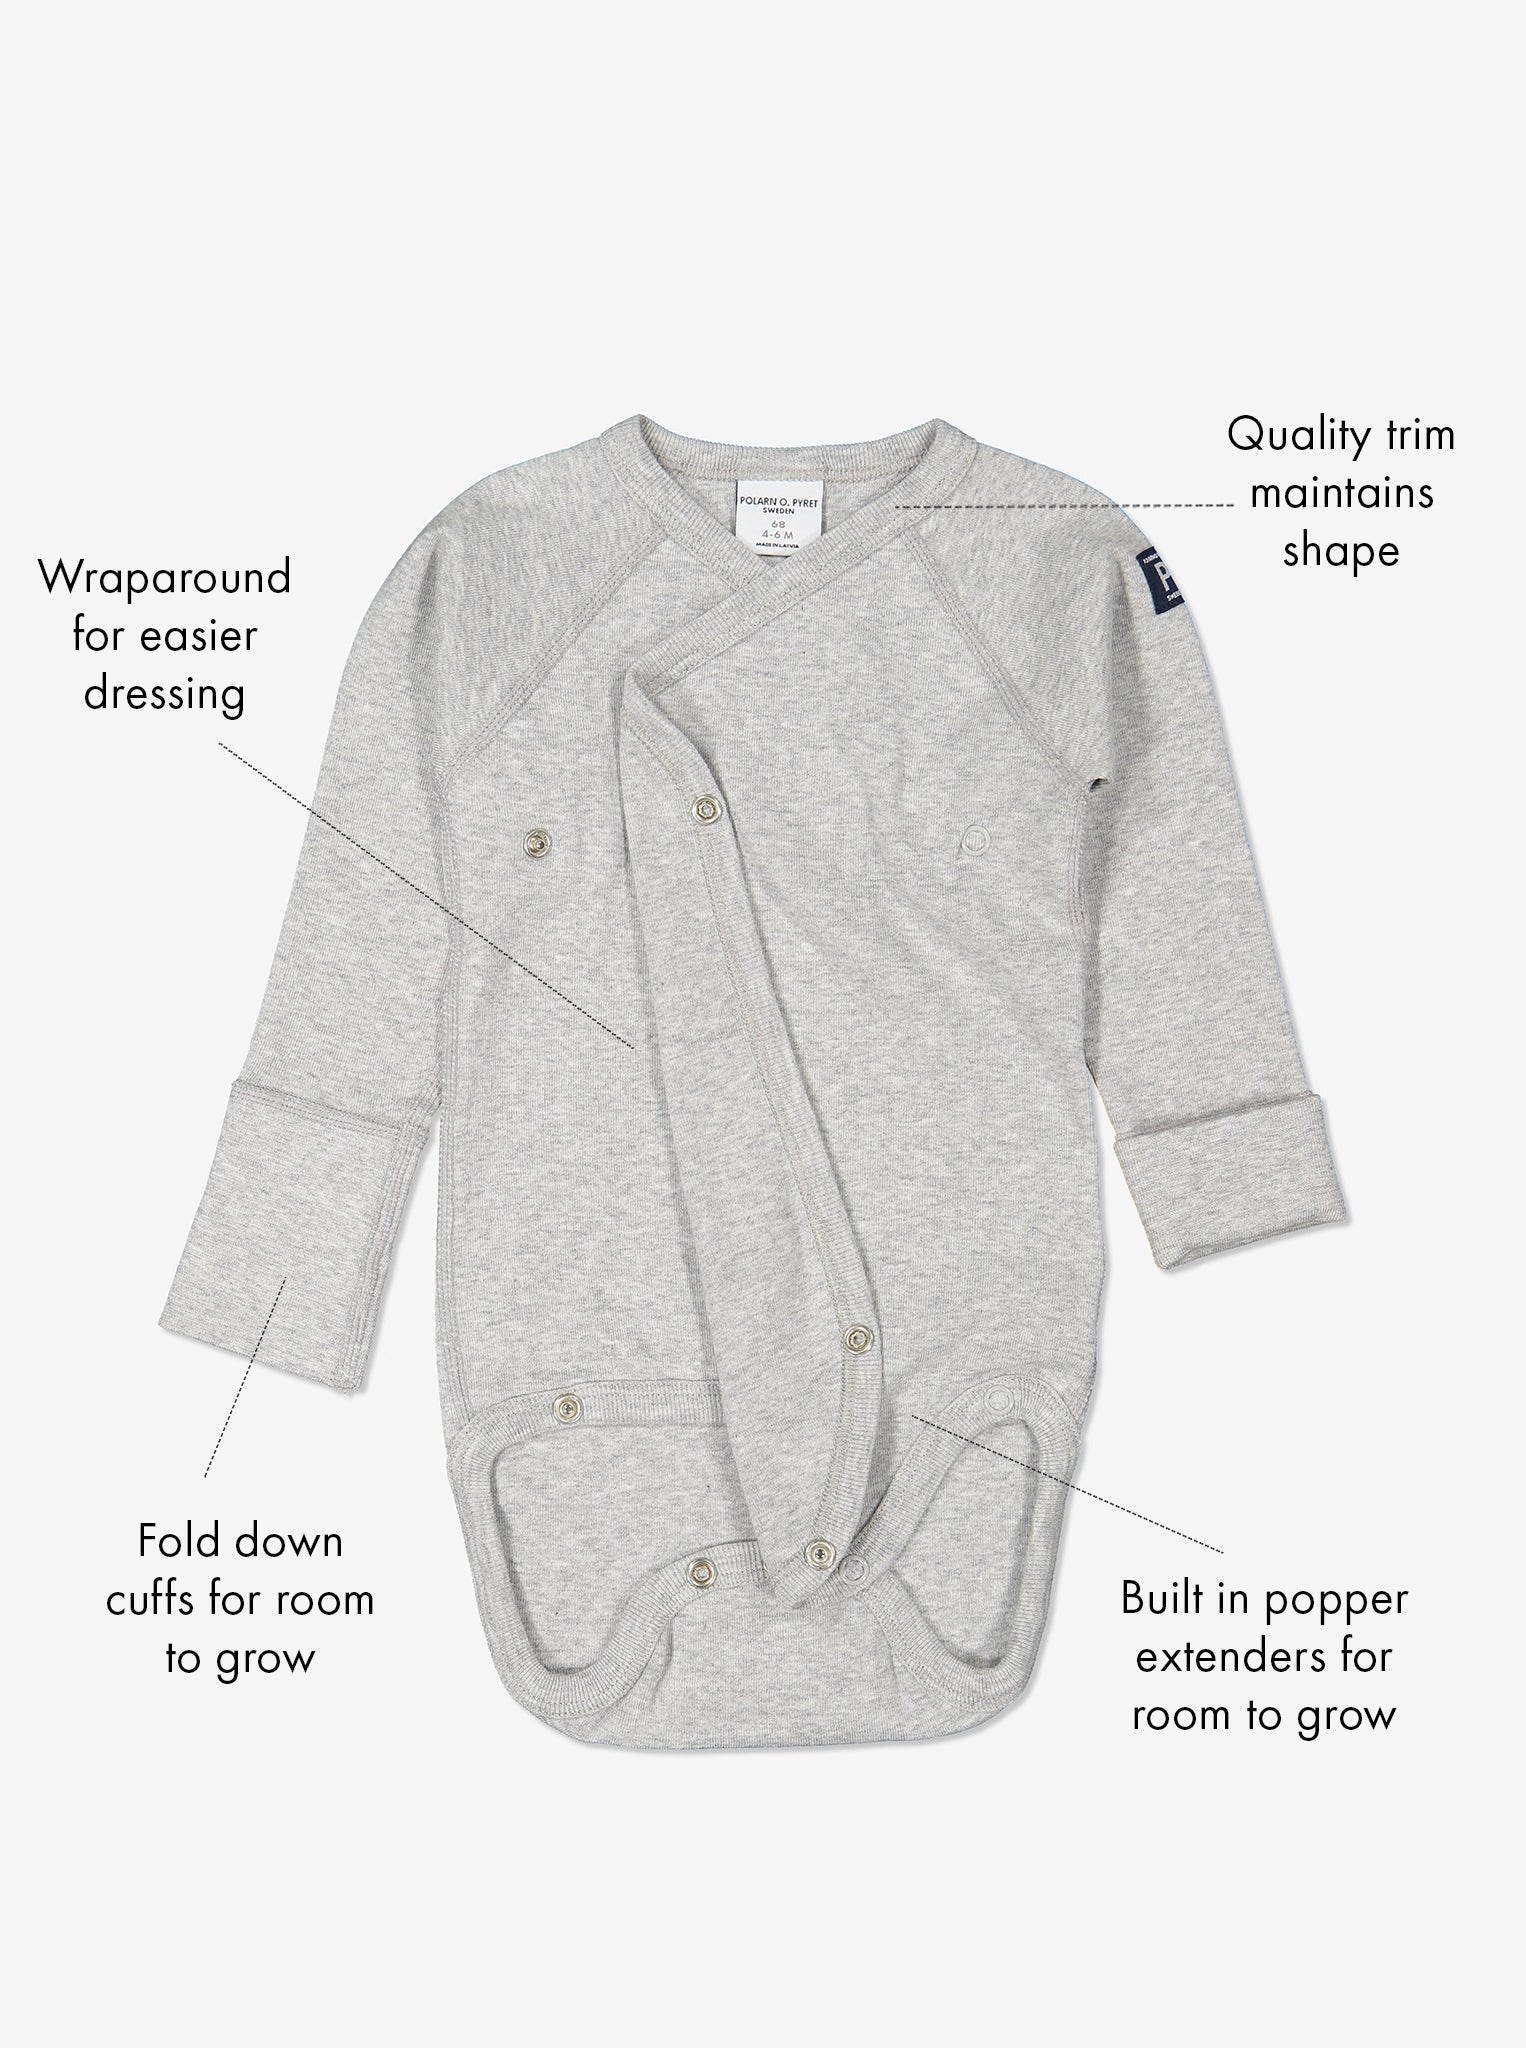 newborn grey babygrow, ethical organic cotton, polarn o. pyret quality unique selling point infographic